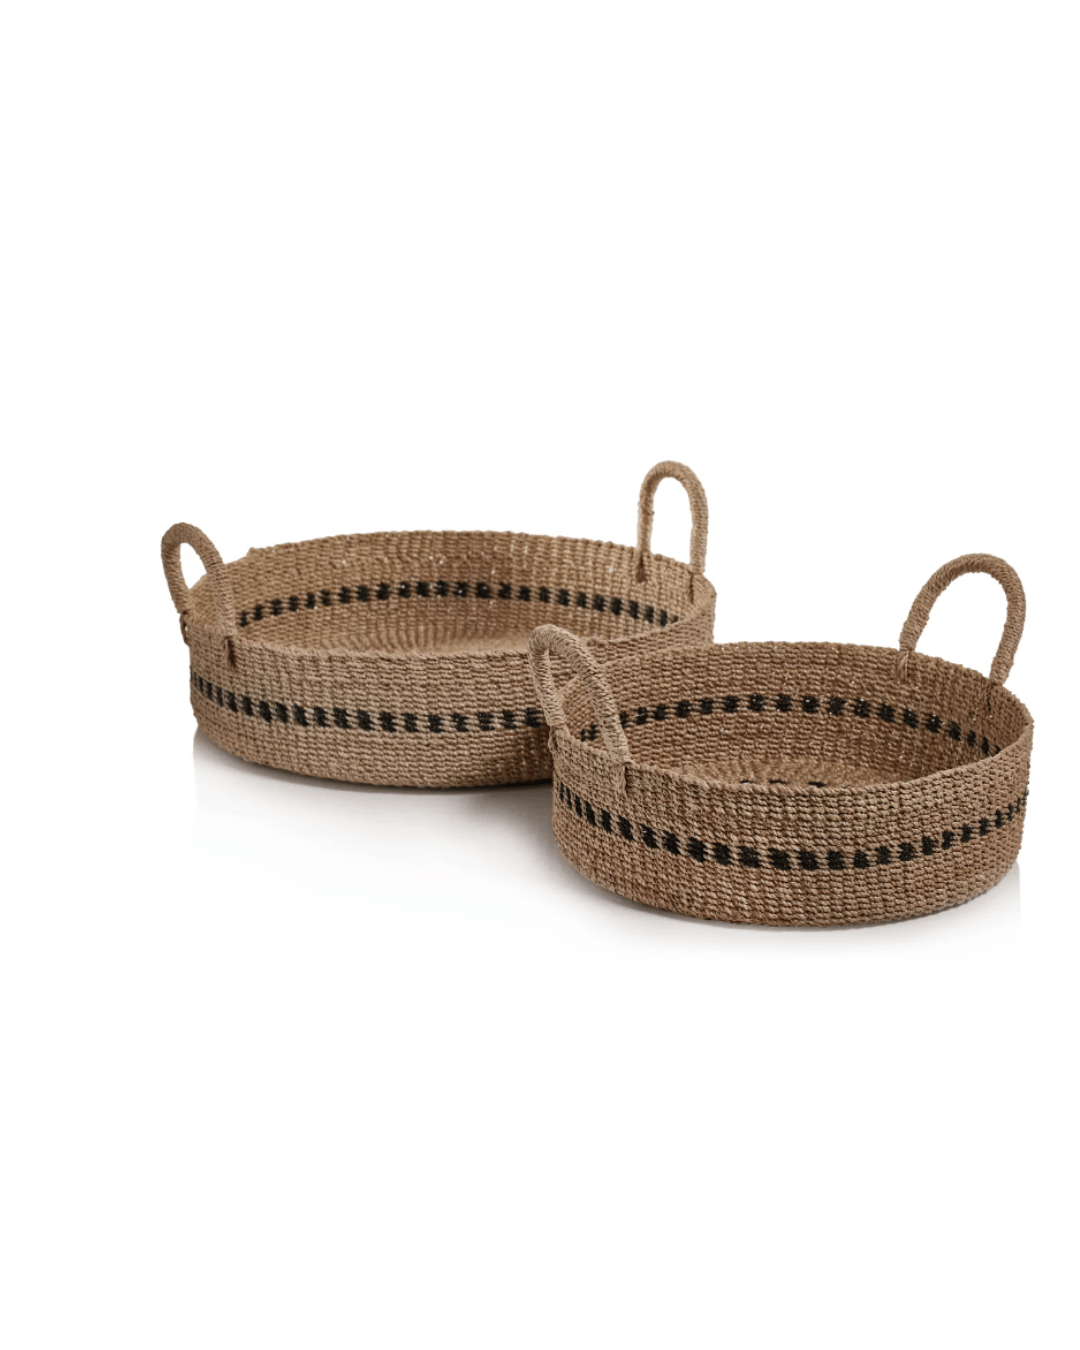 Two Abaca Basket Trays with handles, featuring a natural beige color and decorated with a simple dark brown stripe pattern, displayed against a white background in a Scottsdale, Arizona bungalow by Zodax.